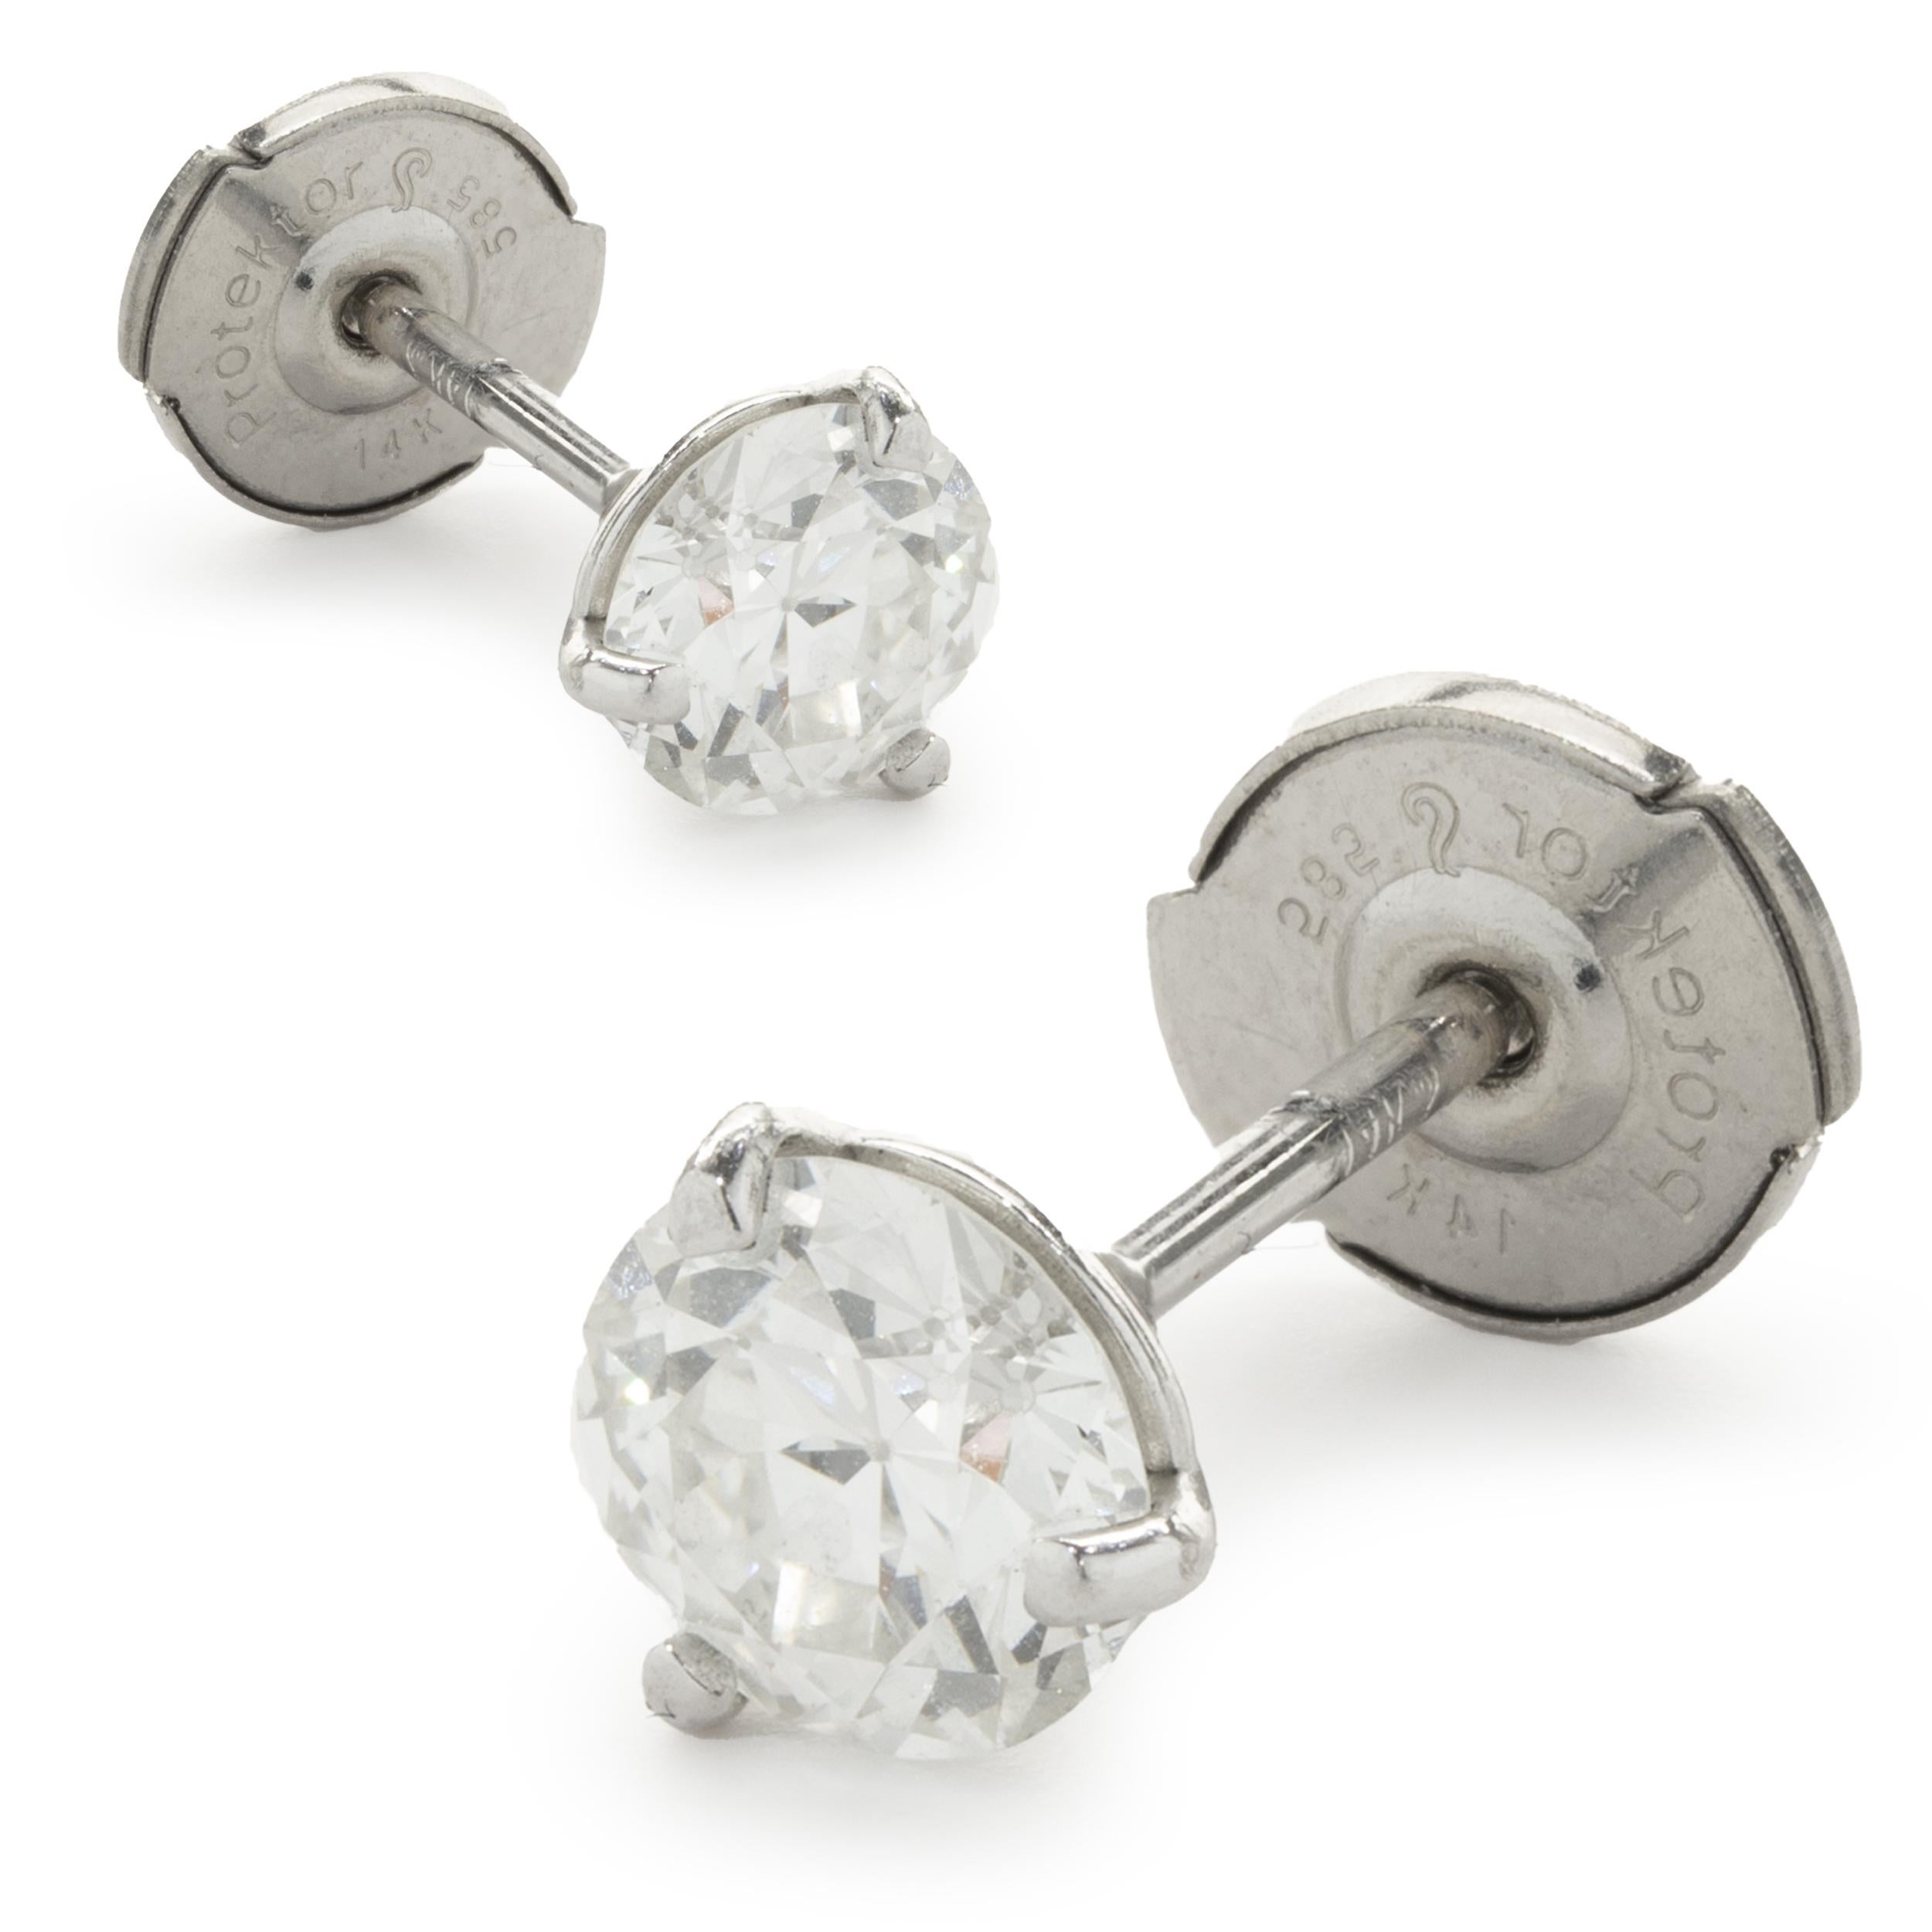 14 Karat White Gold Round European Cut Diamond Stud Earrings In Excellent Condition For Sale In Scottsdale, AZ